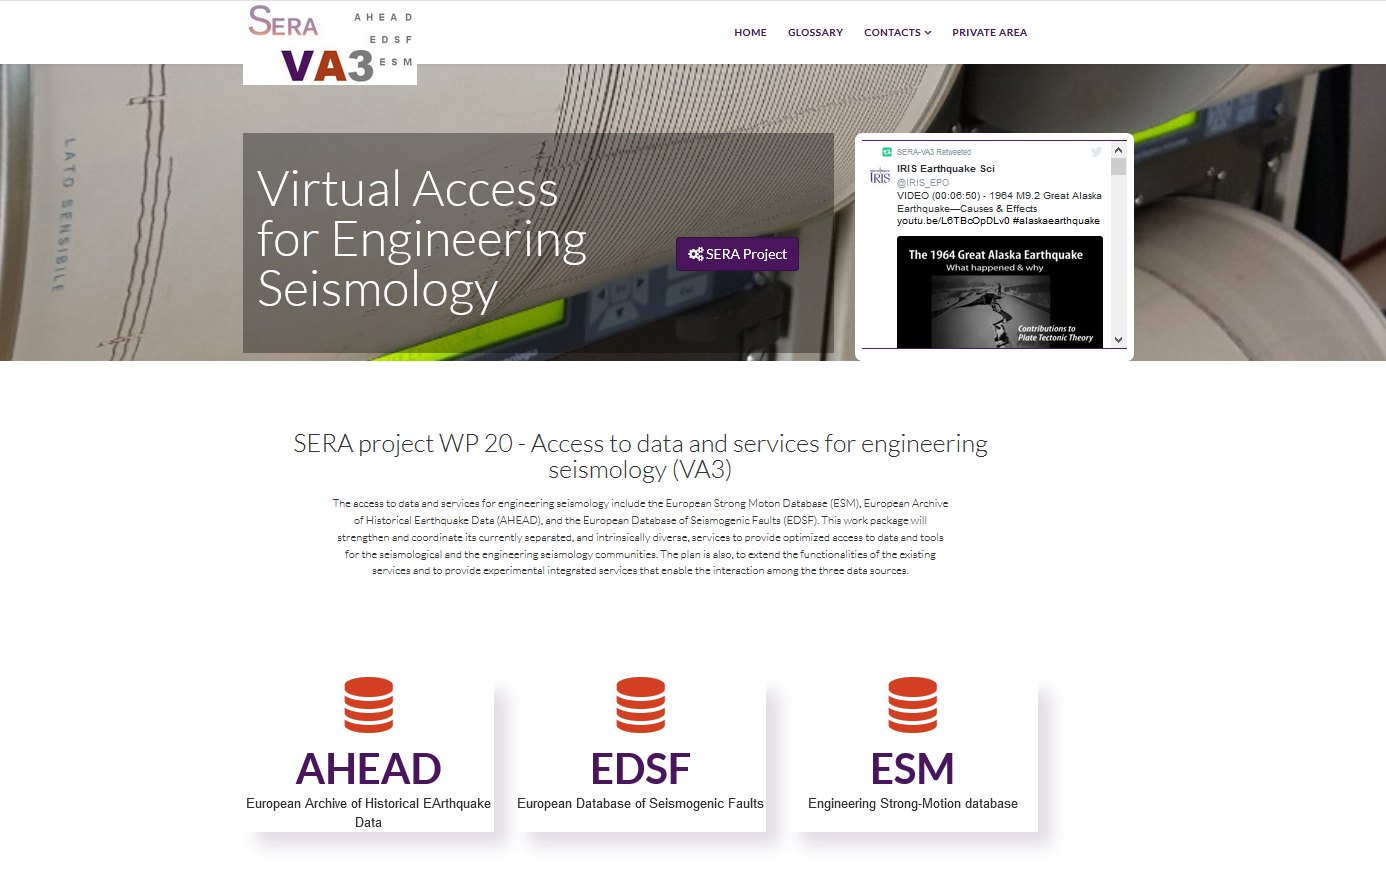 Data and services for engineering seismology portal online